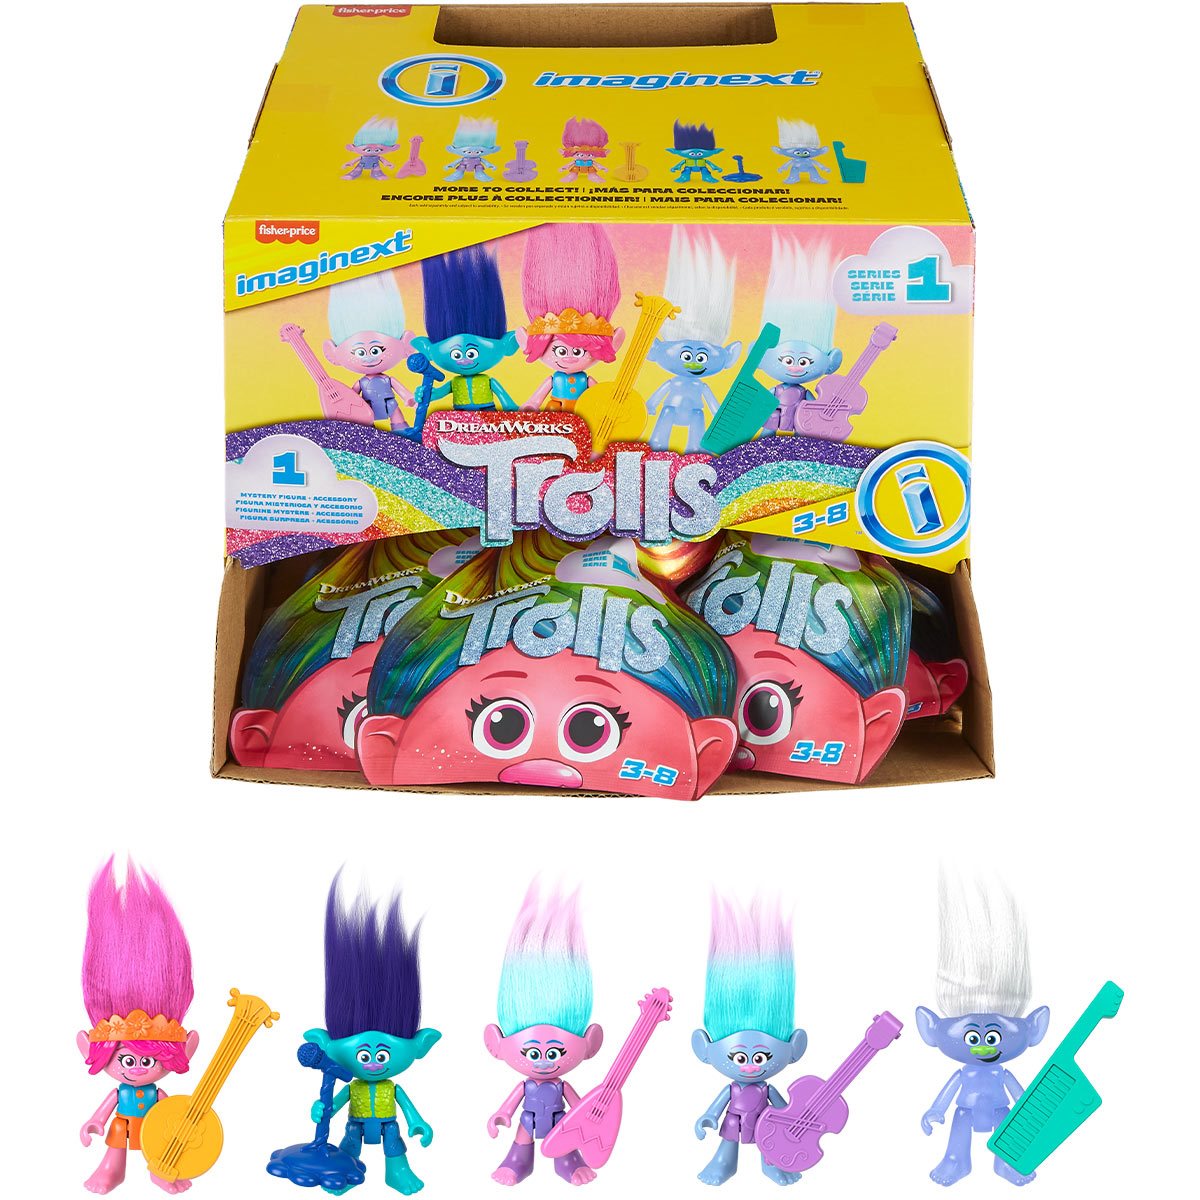 Poppy Trolls Doll with Hair Set of 6,Trolls Toys Party Supplies,Kids Action  Figures include Branch and Poppy,Guy Diamond, Biggie - AliExpress